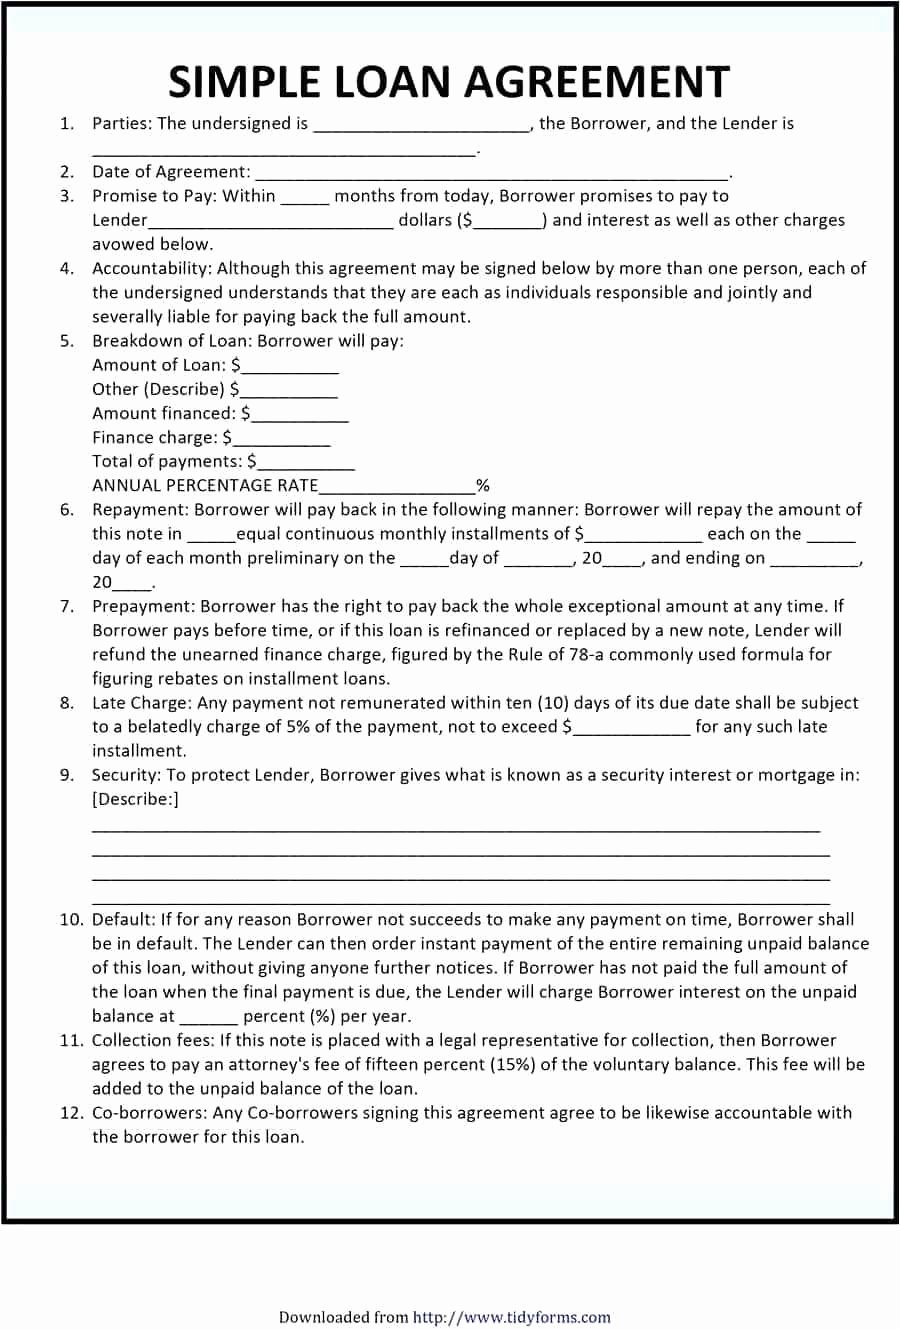 Simple Employment Contract Template Free Unique Simple Employee Contract Template